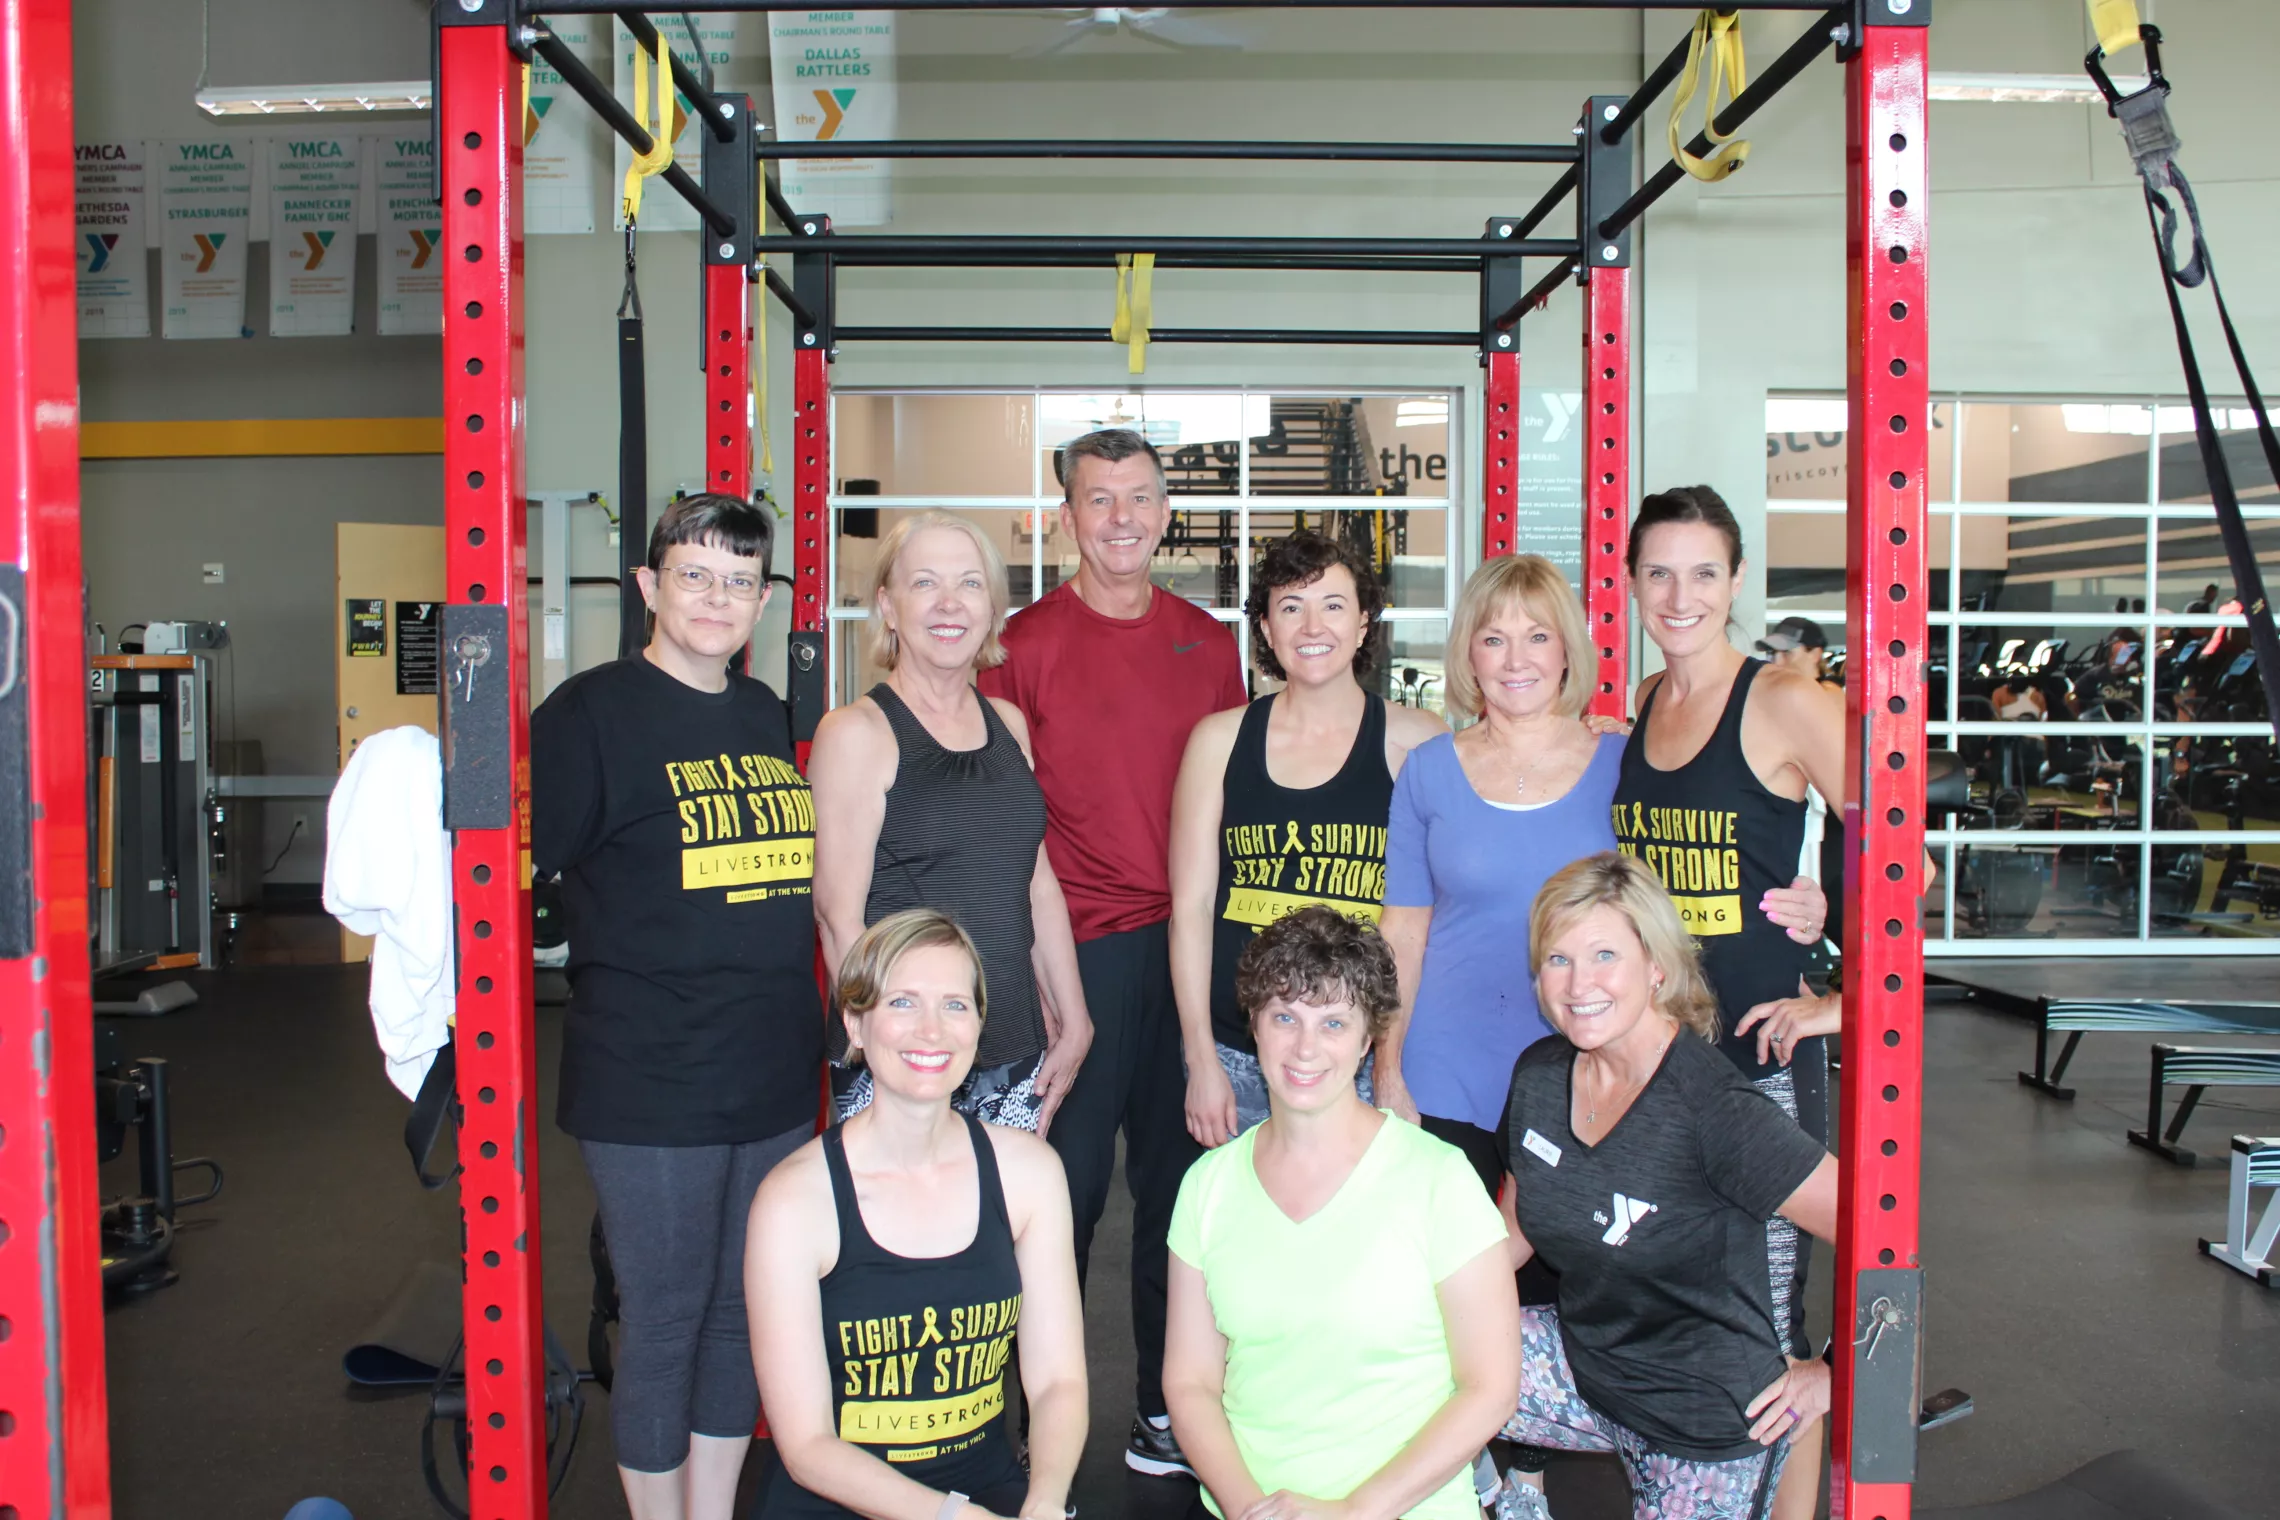 LiveStrong group